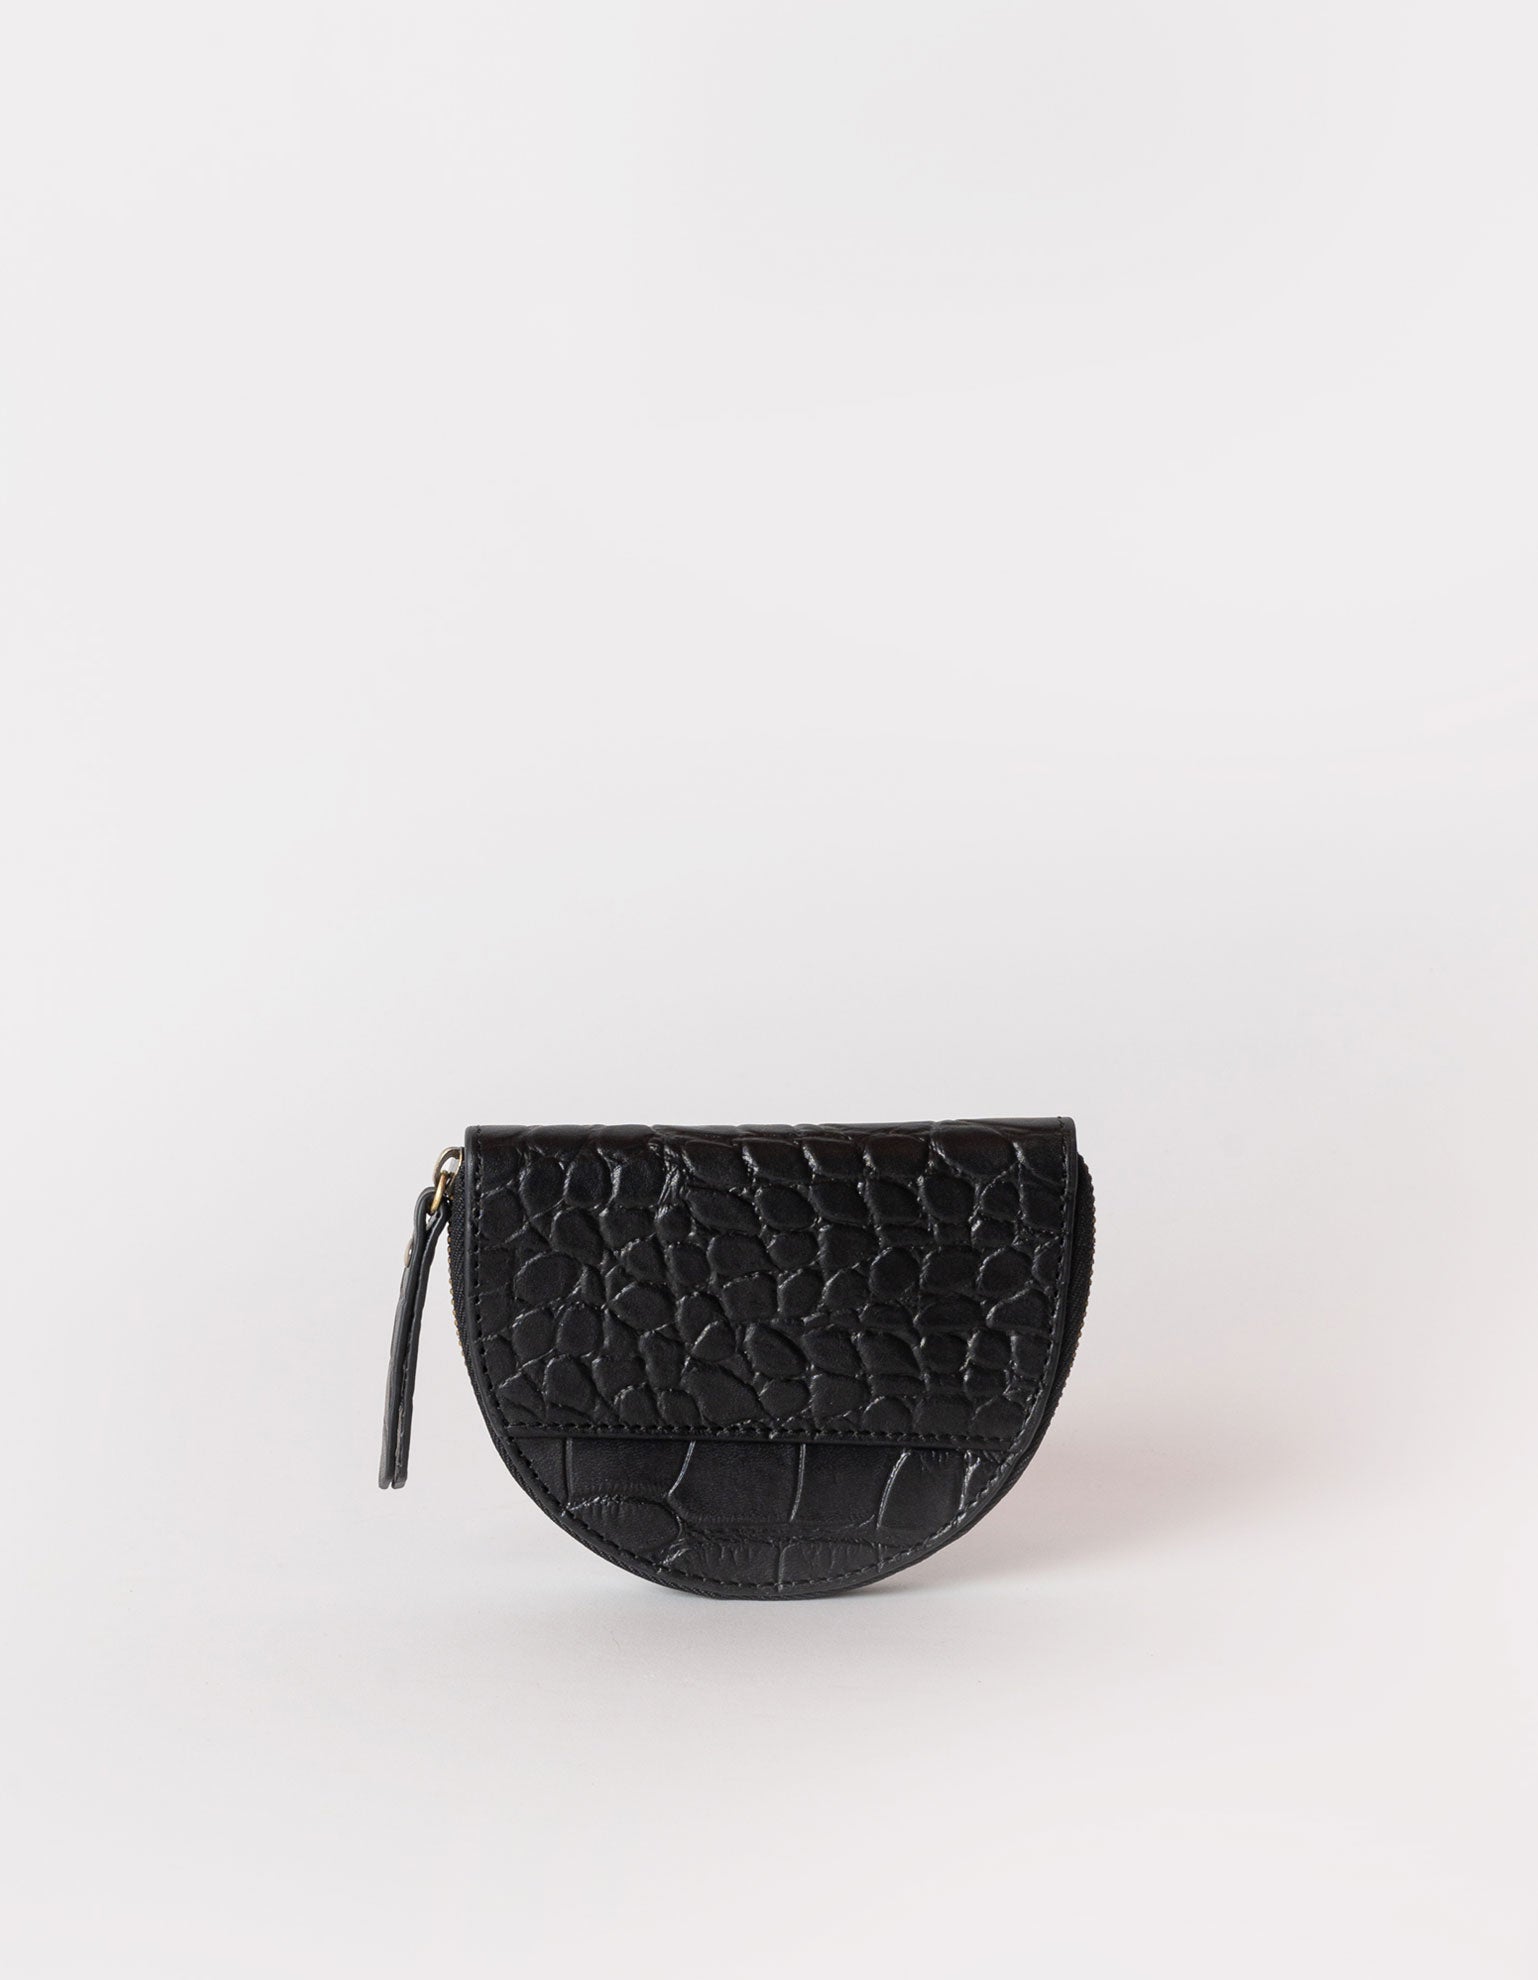 Laura Purse Black Classic Croco Leather. Round moon shape coin purse unisex wallet. Back product image.